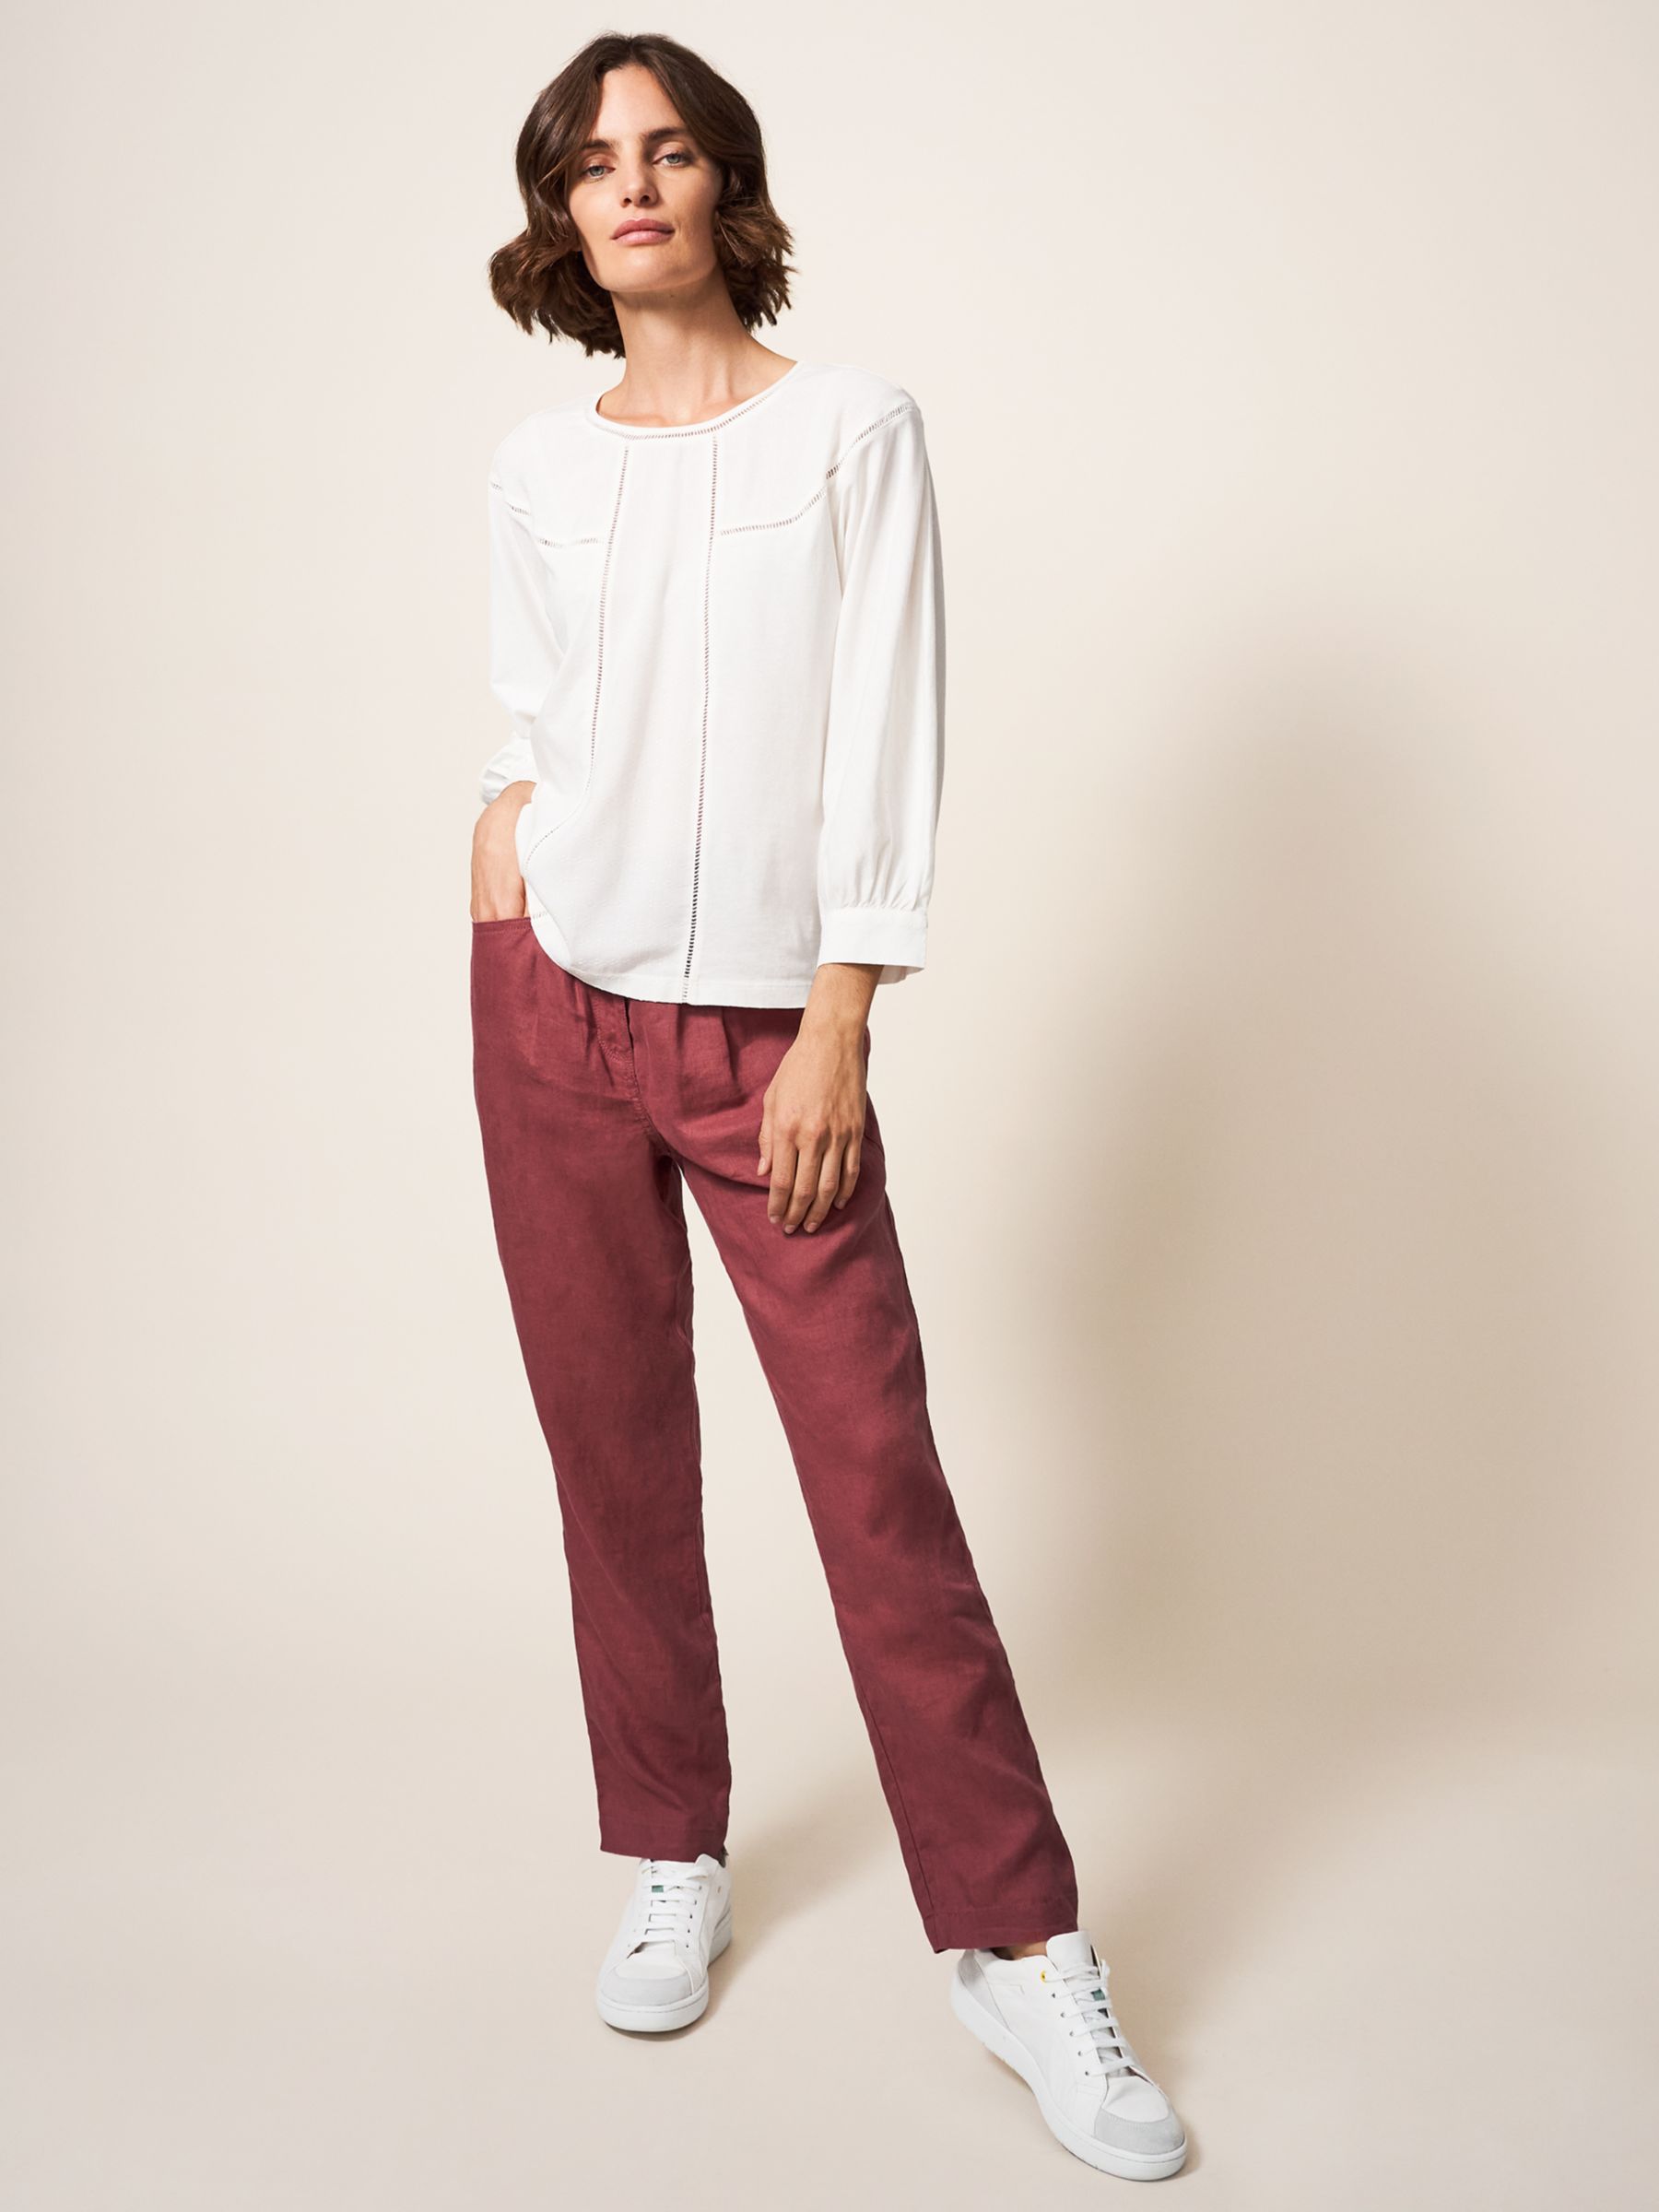 How To Style Dress Pants For Spring - The Dark Plum